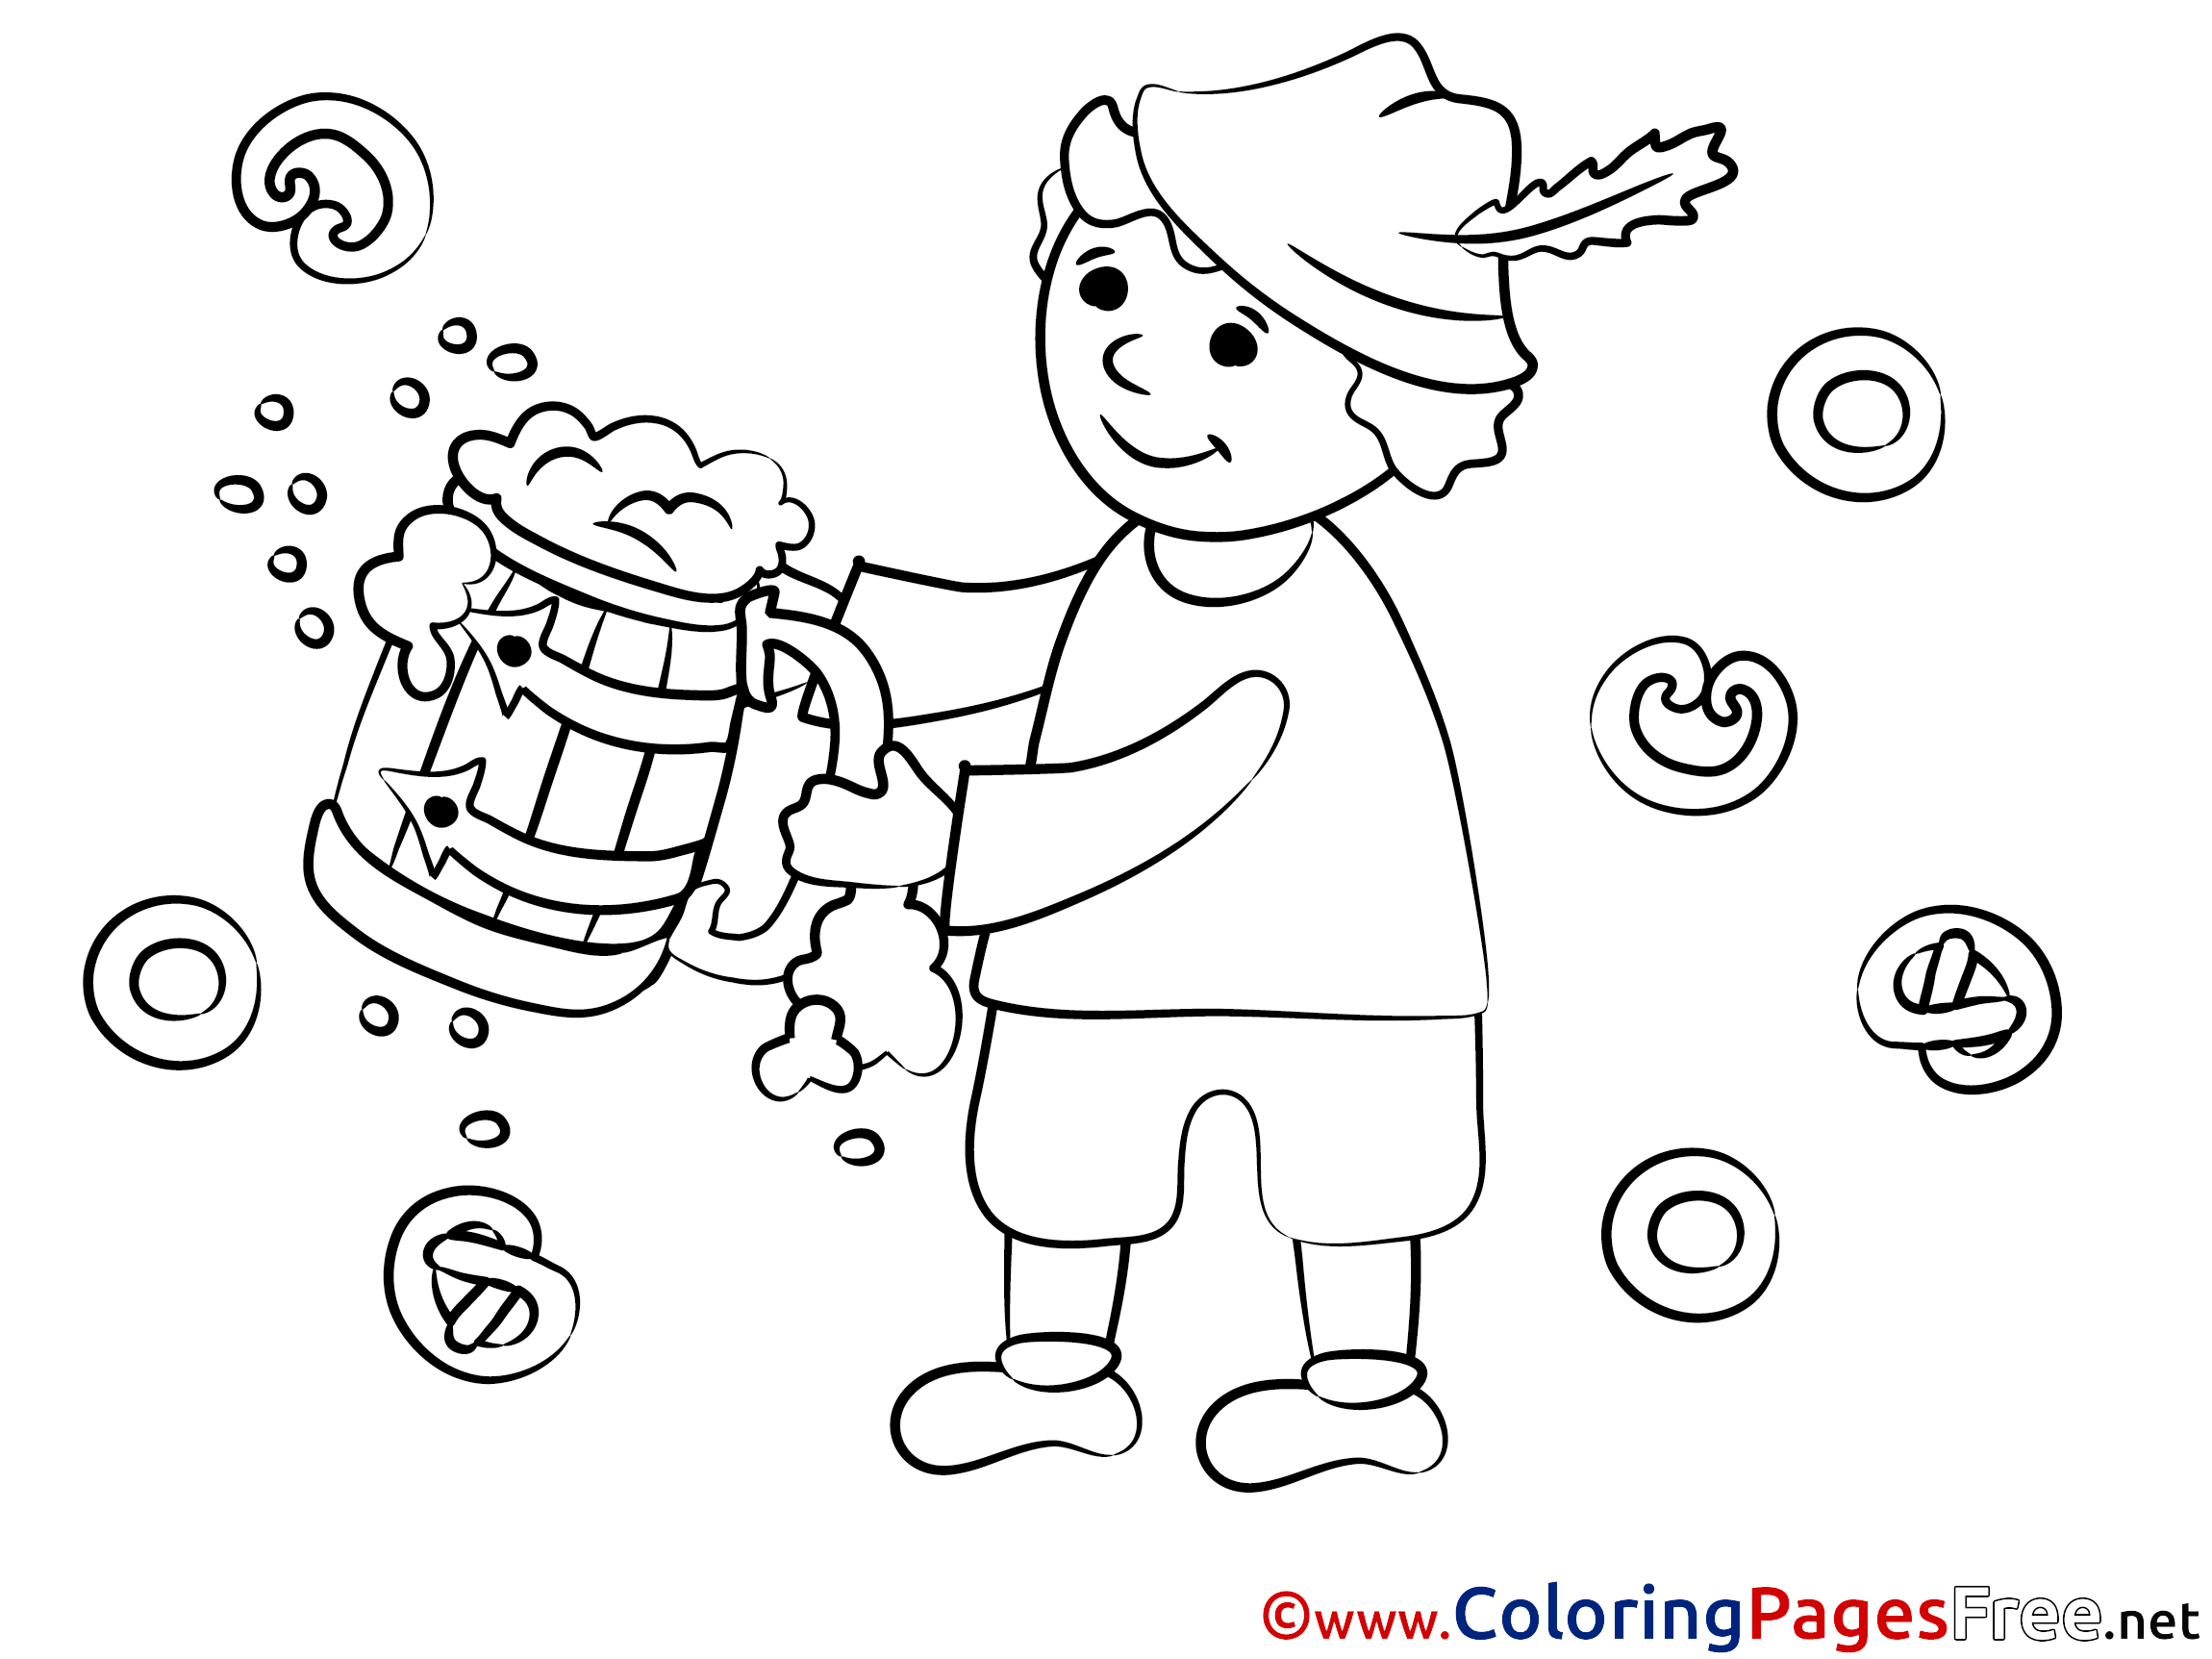 Beer Oktoberfest for Children free Coloring Pages